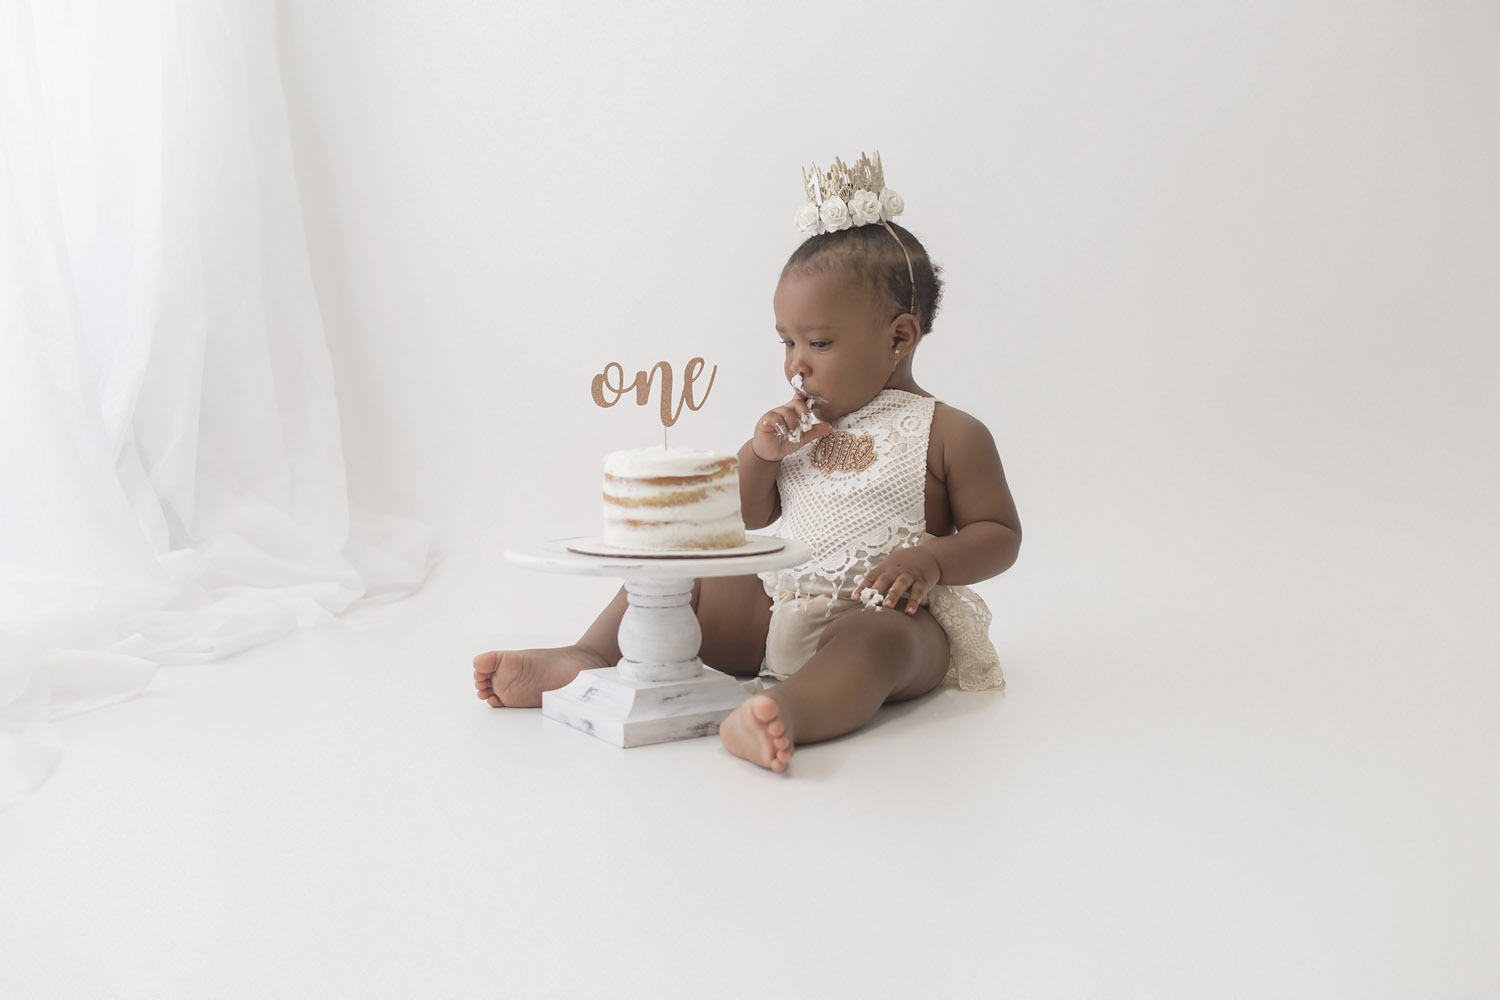 baby eating cake for her one year milestone cake smash photography session in parkland, fl